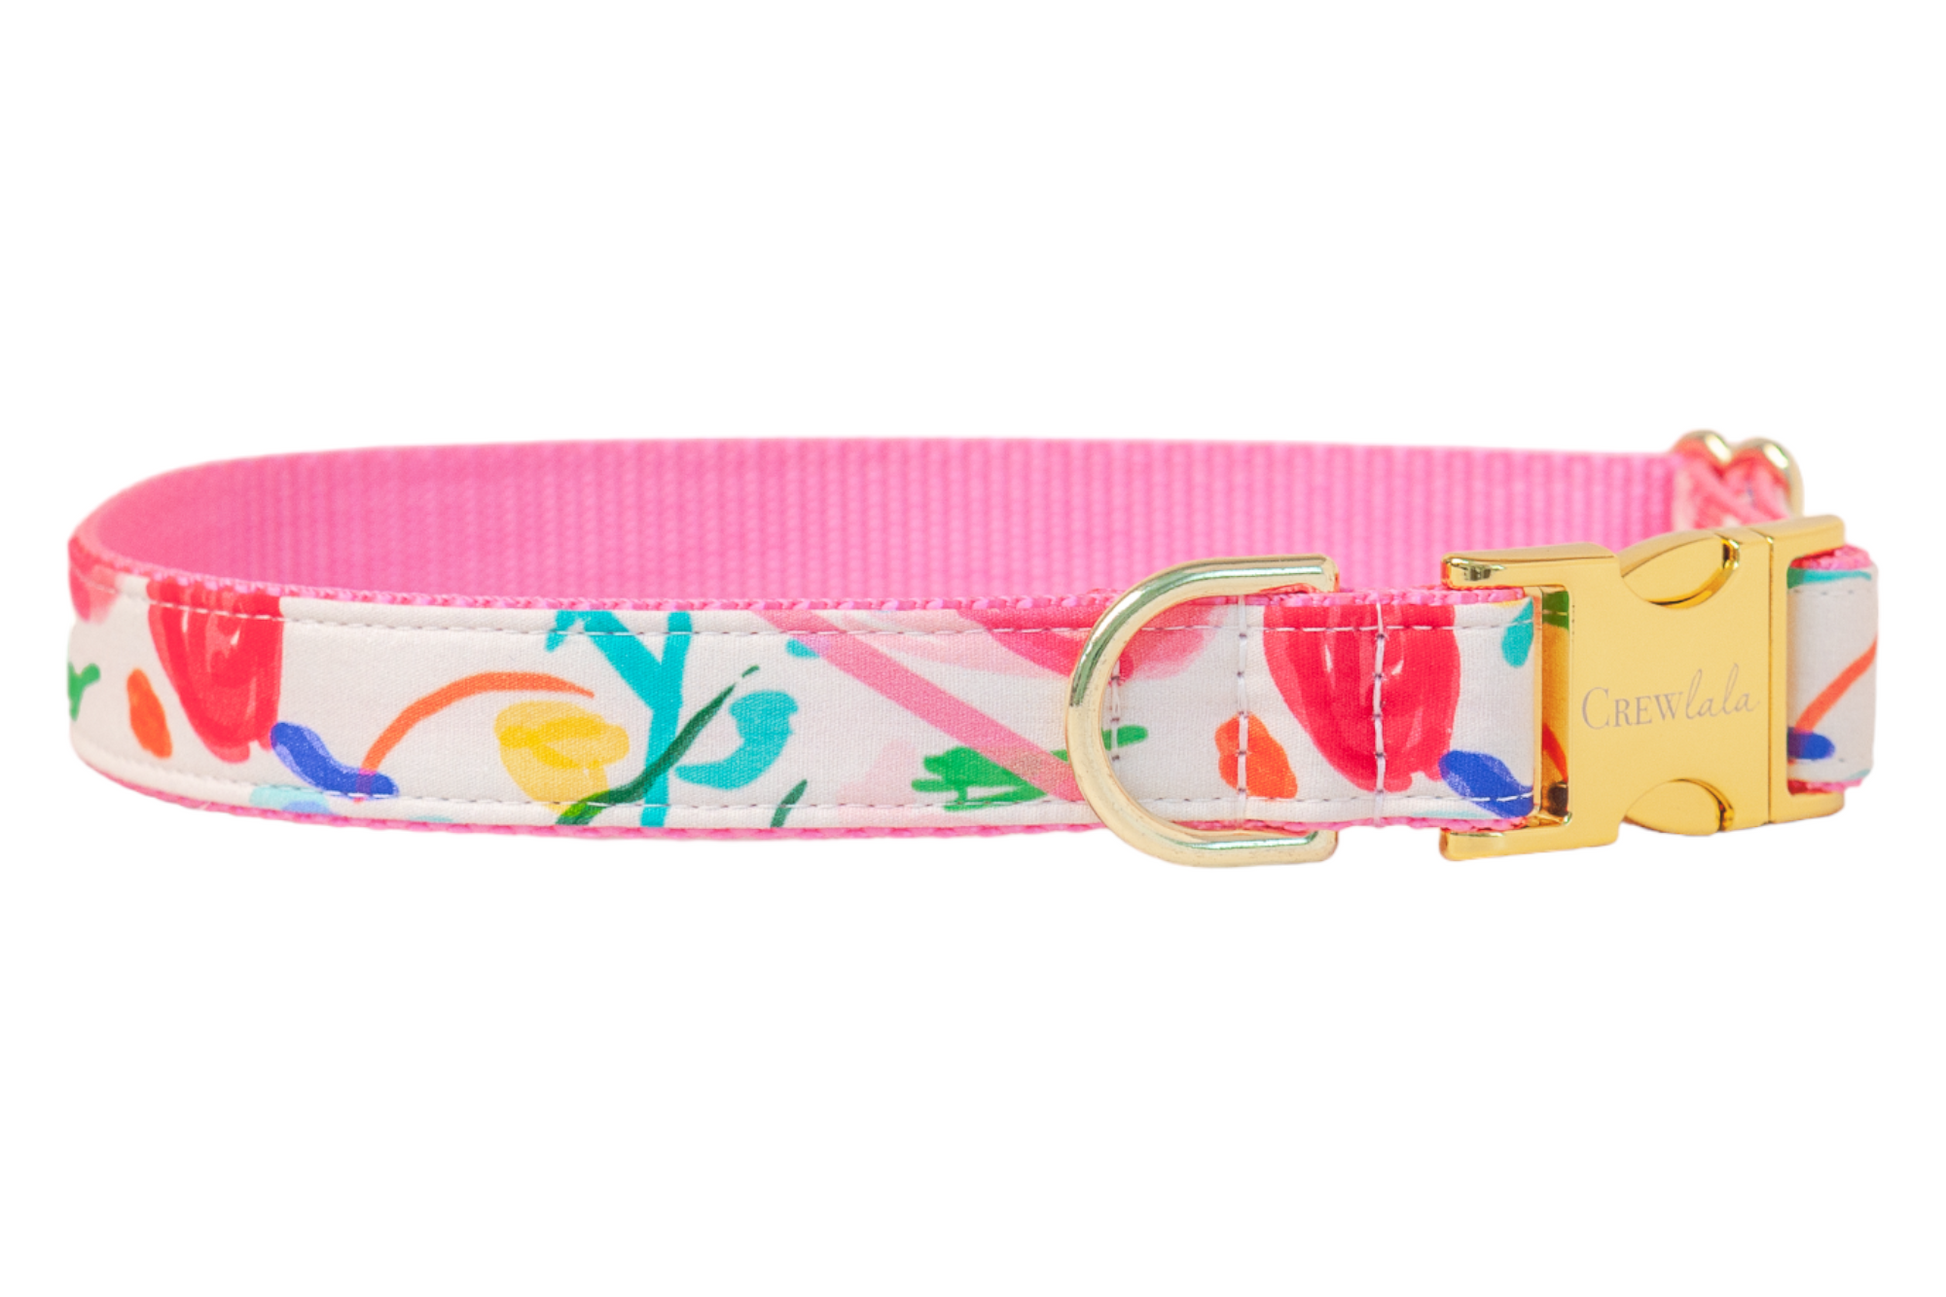 90's Party Dog Collar - Two Styles! - Crew LaLa